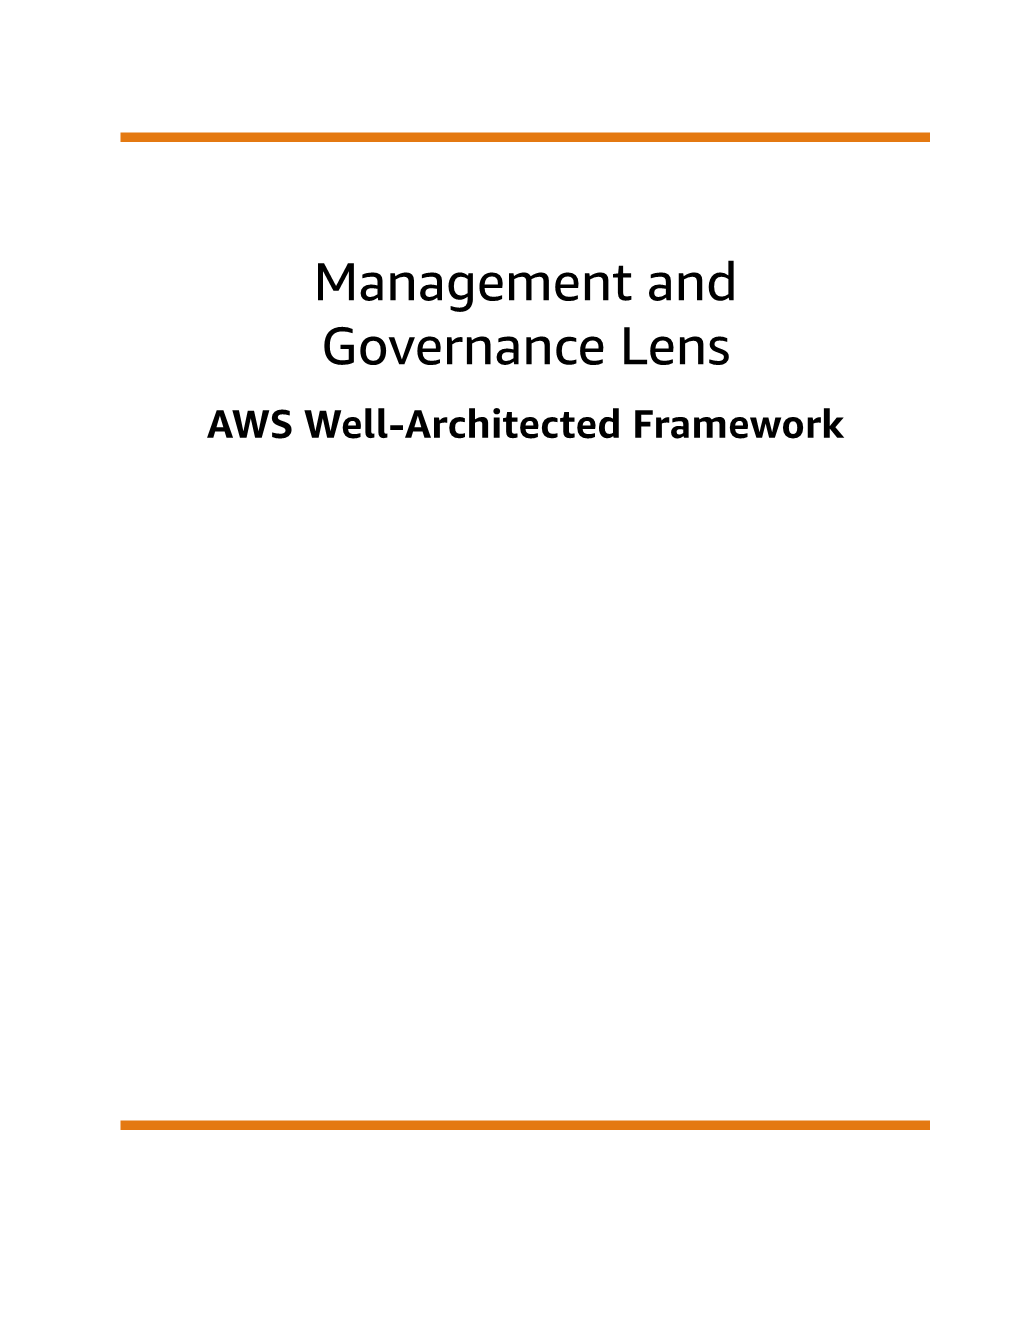 Management and Governance Lens AWS Well-Architected Framework Management and Governance Lens AWS Well-Architected Framework